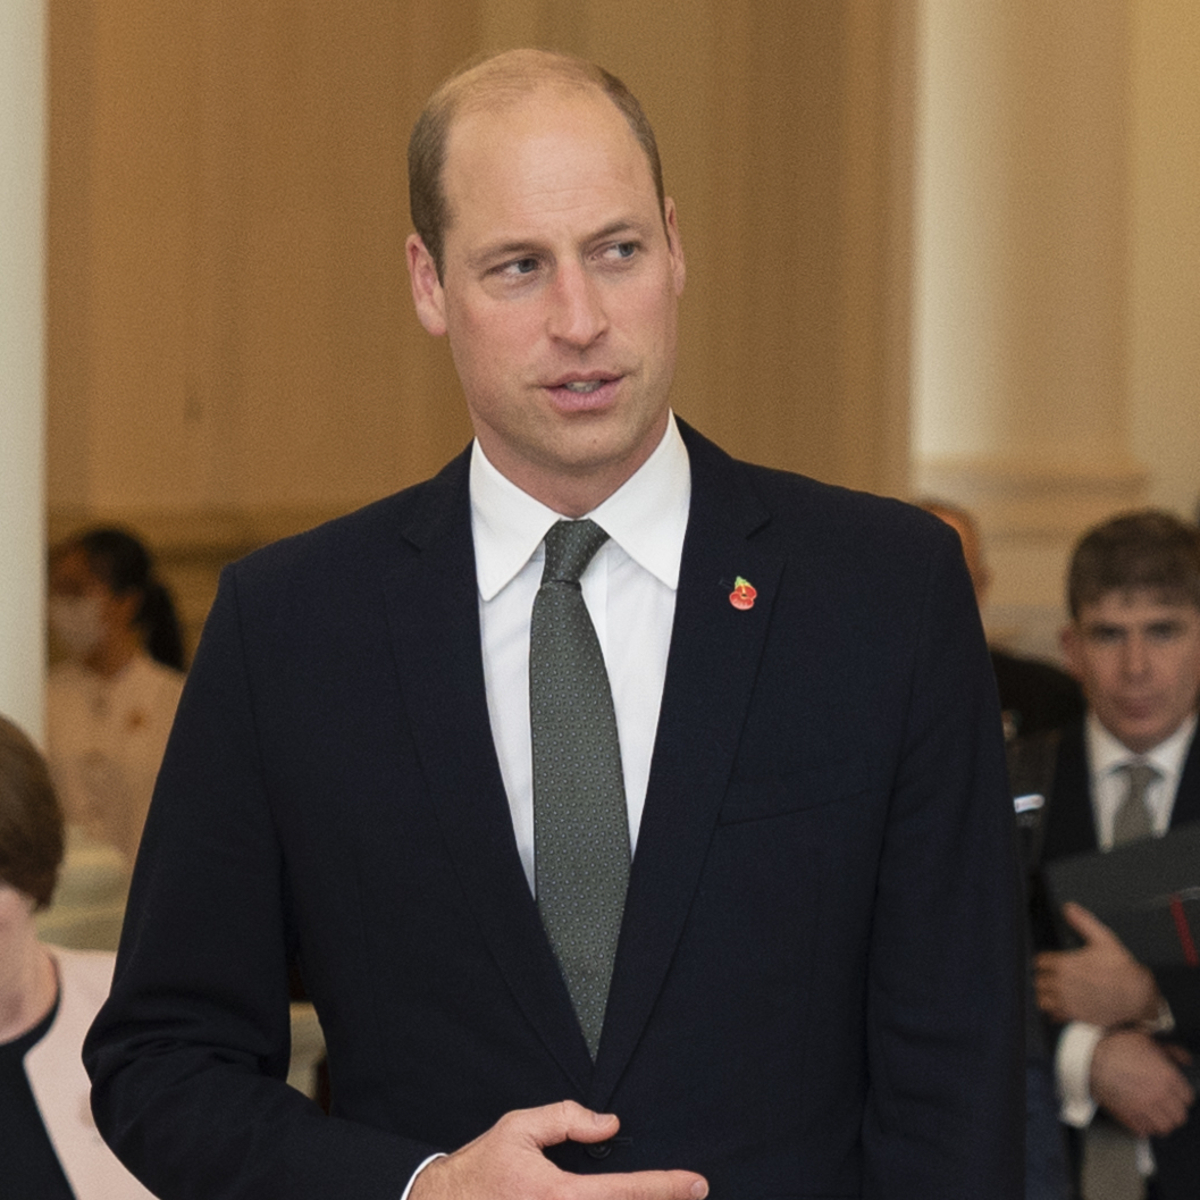 Prince William warned the Queen he would feel uncomfortable if